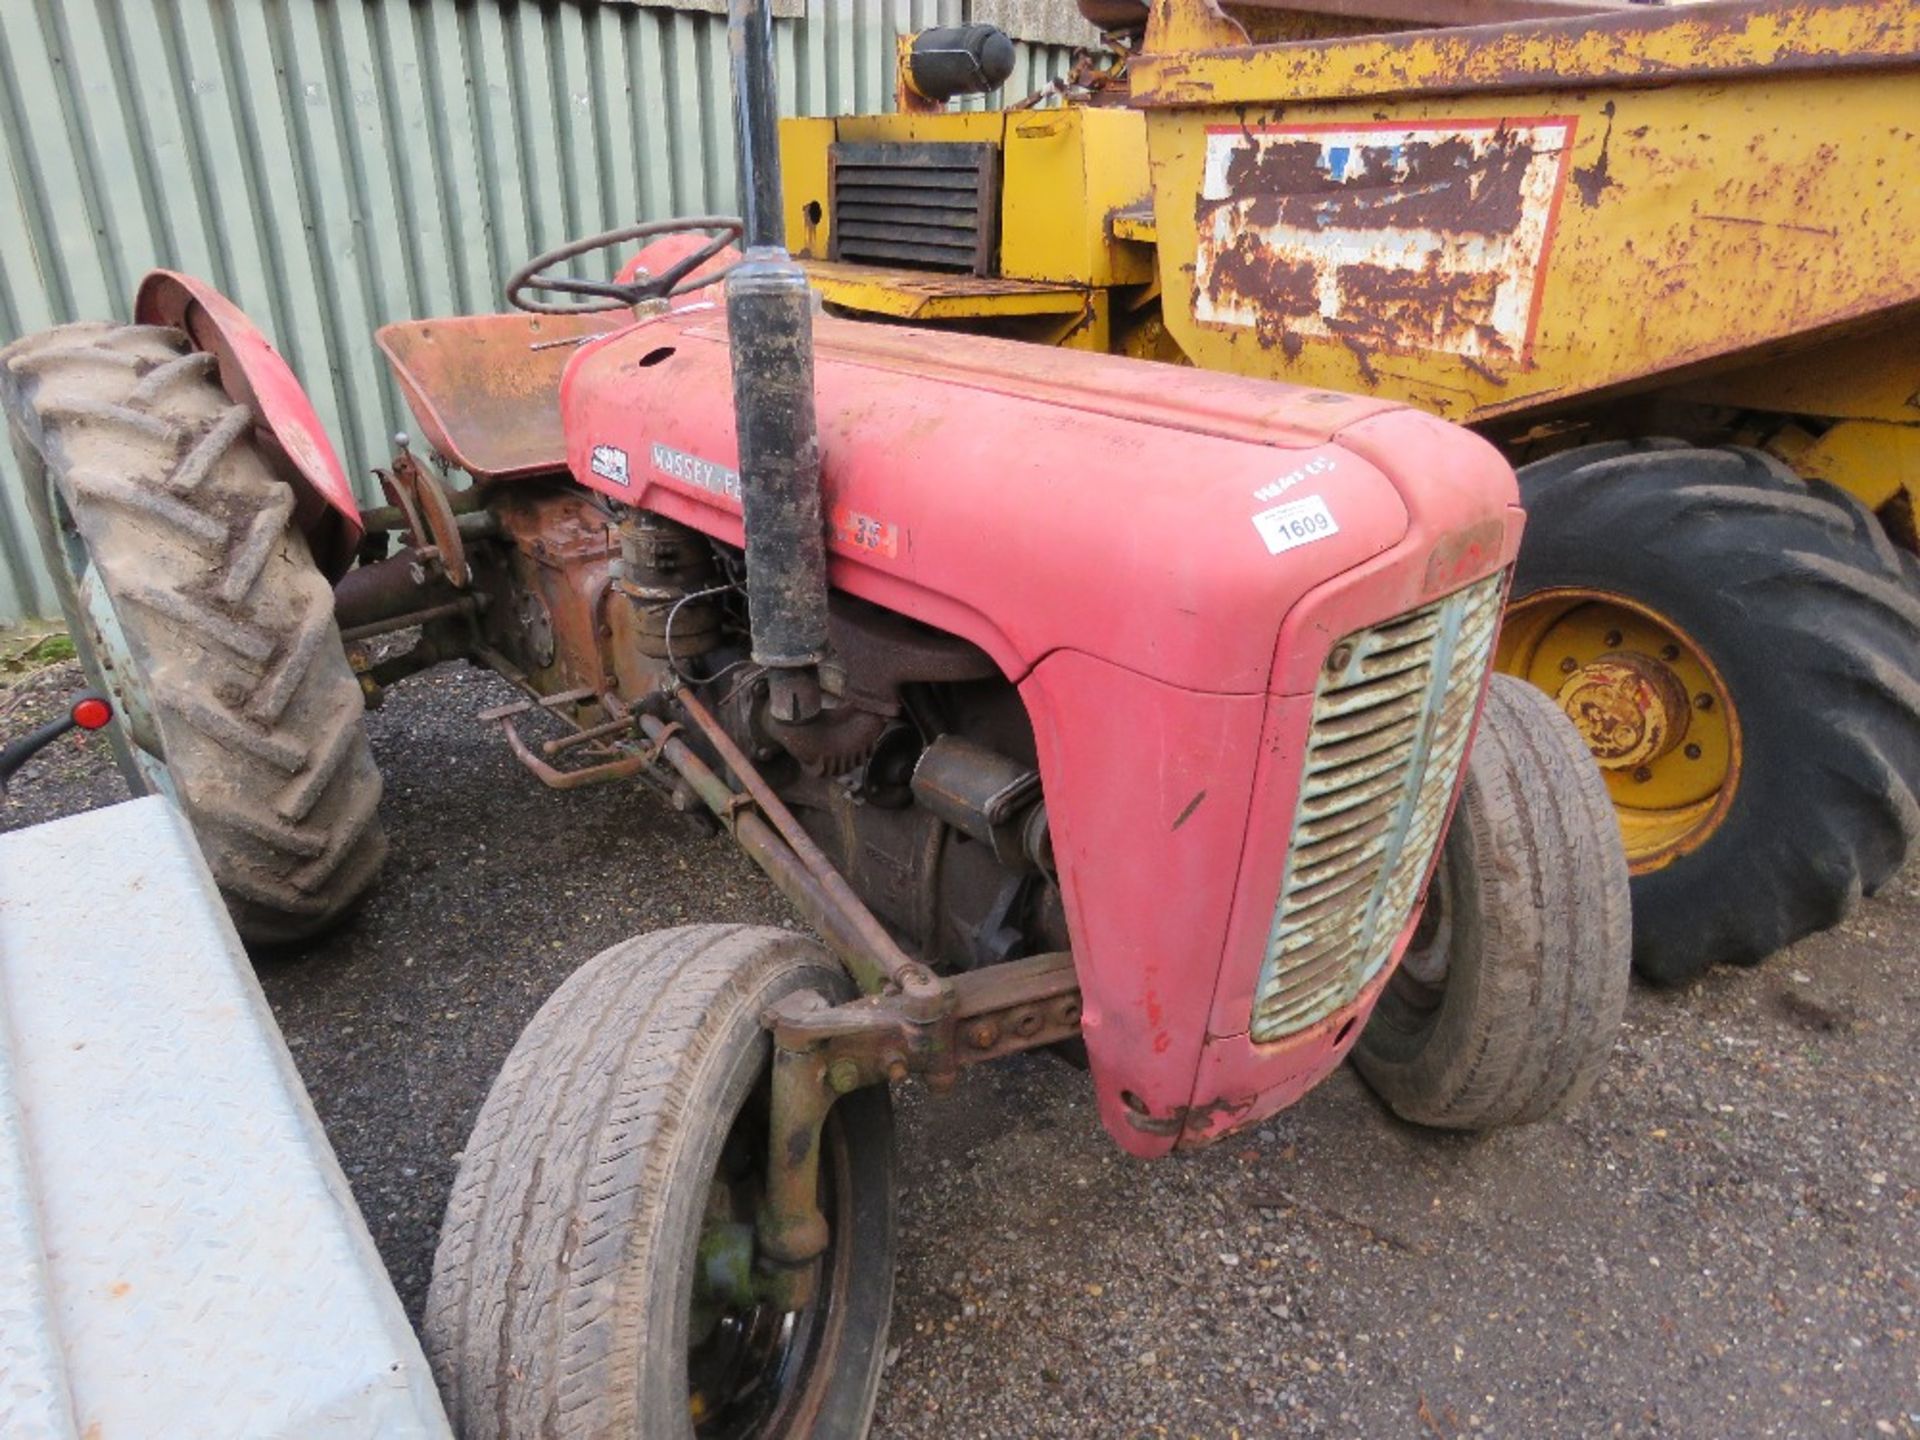 MASSEY FERGUSON 35 4 CYLINDER TRACTOR. BRIEF TESTING BY PUSHING SAW THE ENGINE TURN OVER AND TRY TO